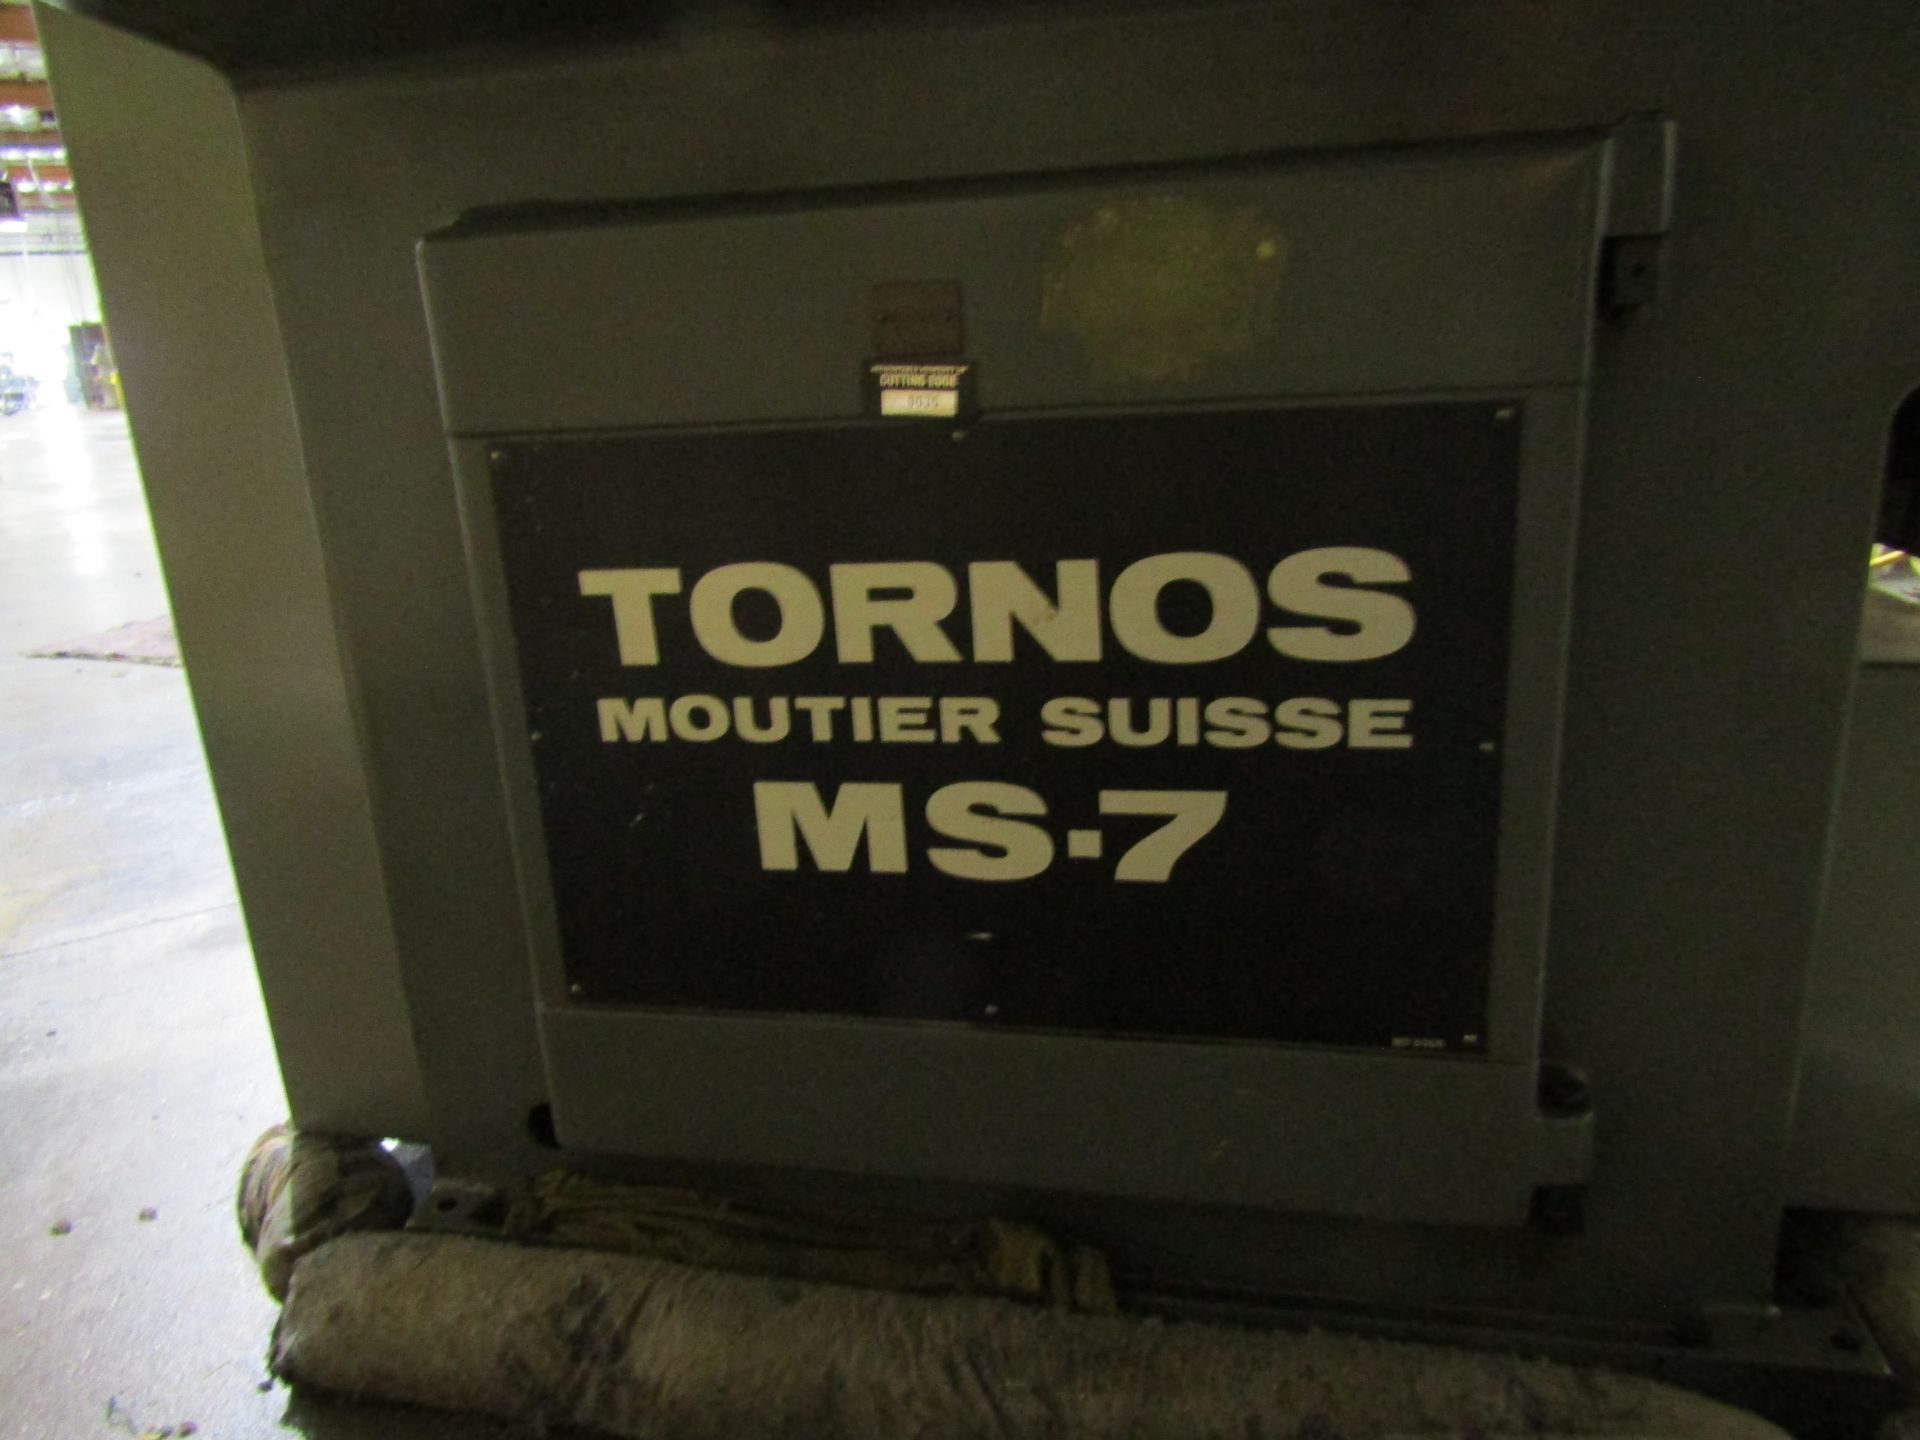 TORNOS AUTOMATIC SWISS LATHE, MODEL MS-7, SERIAL MS 50150 - Image 6 of 10